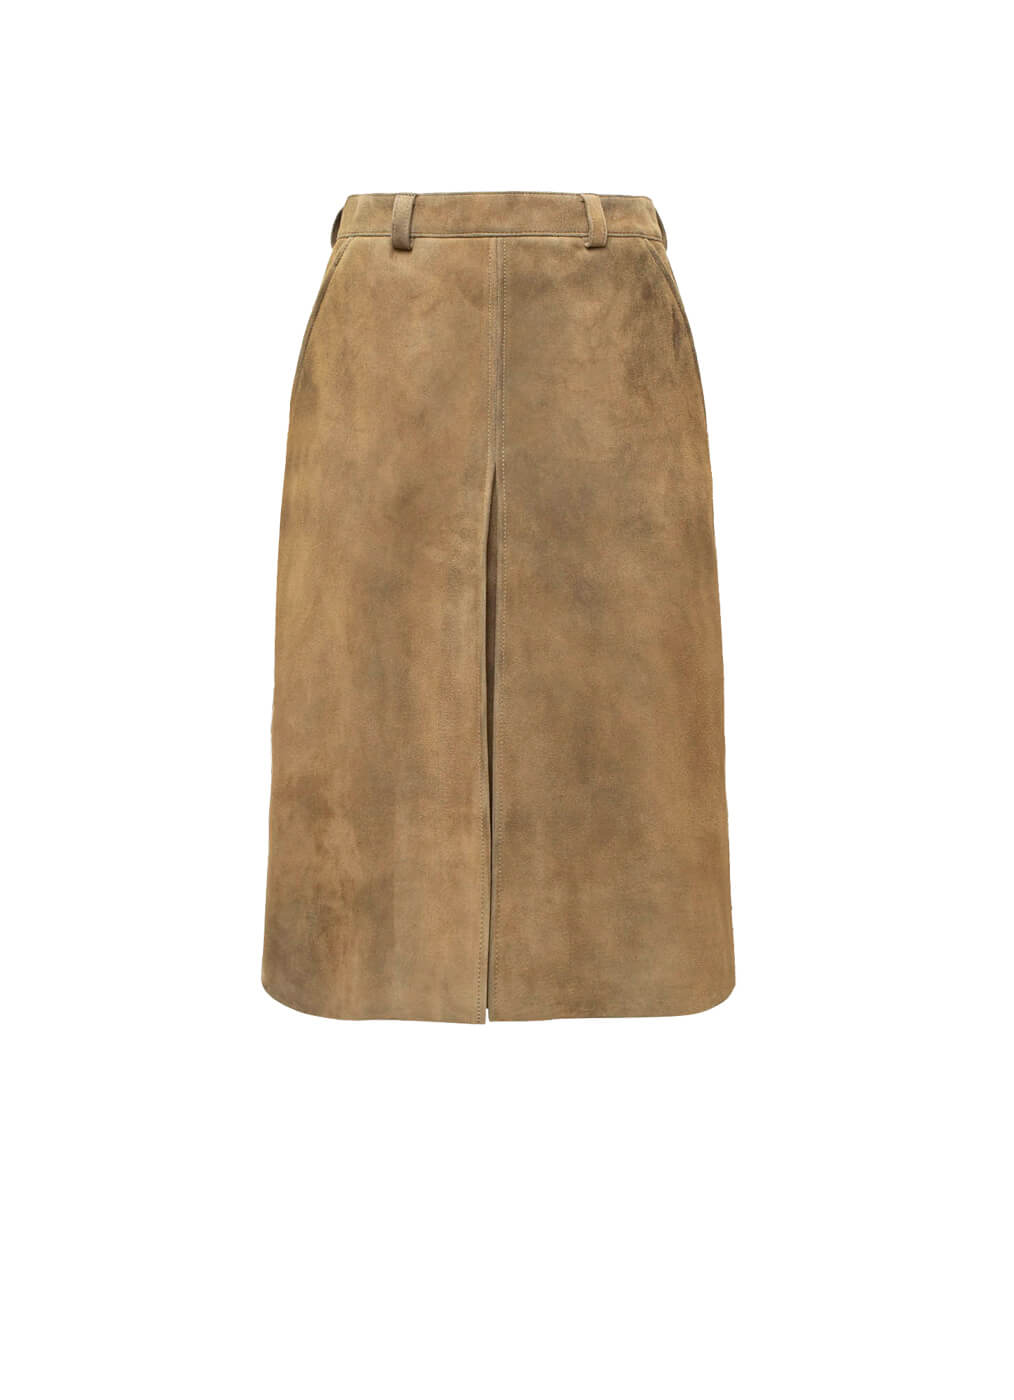 Goat Leather Skirt “Indy”, wood